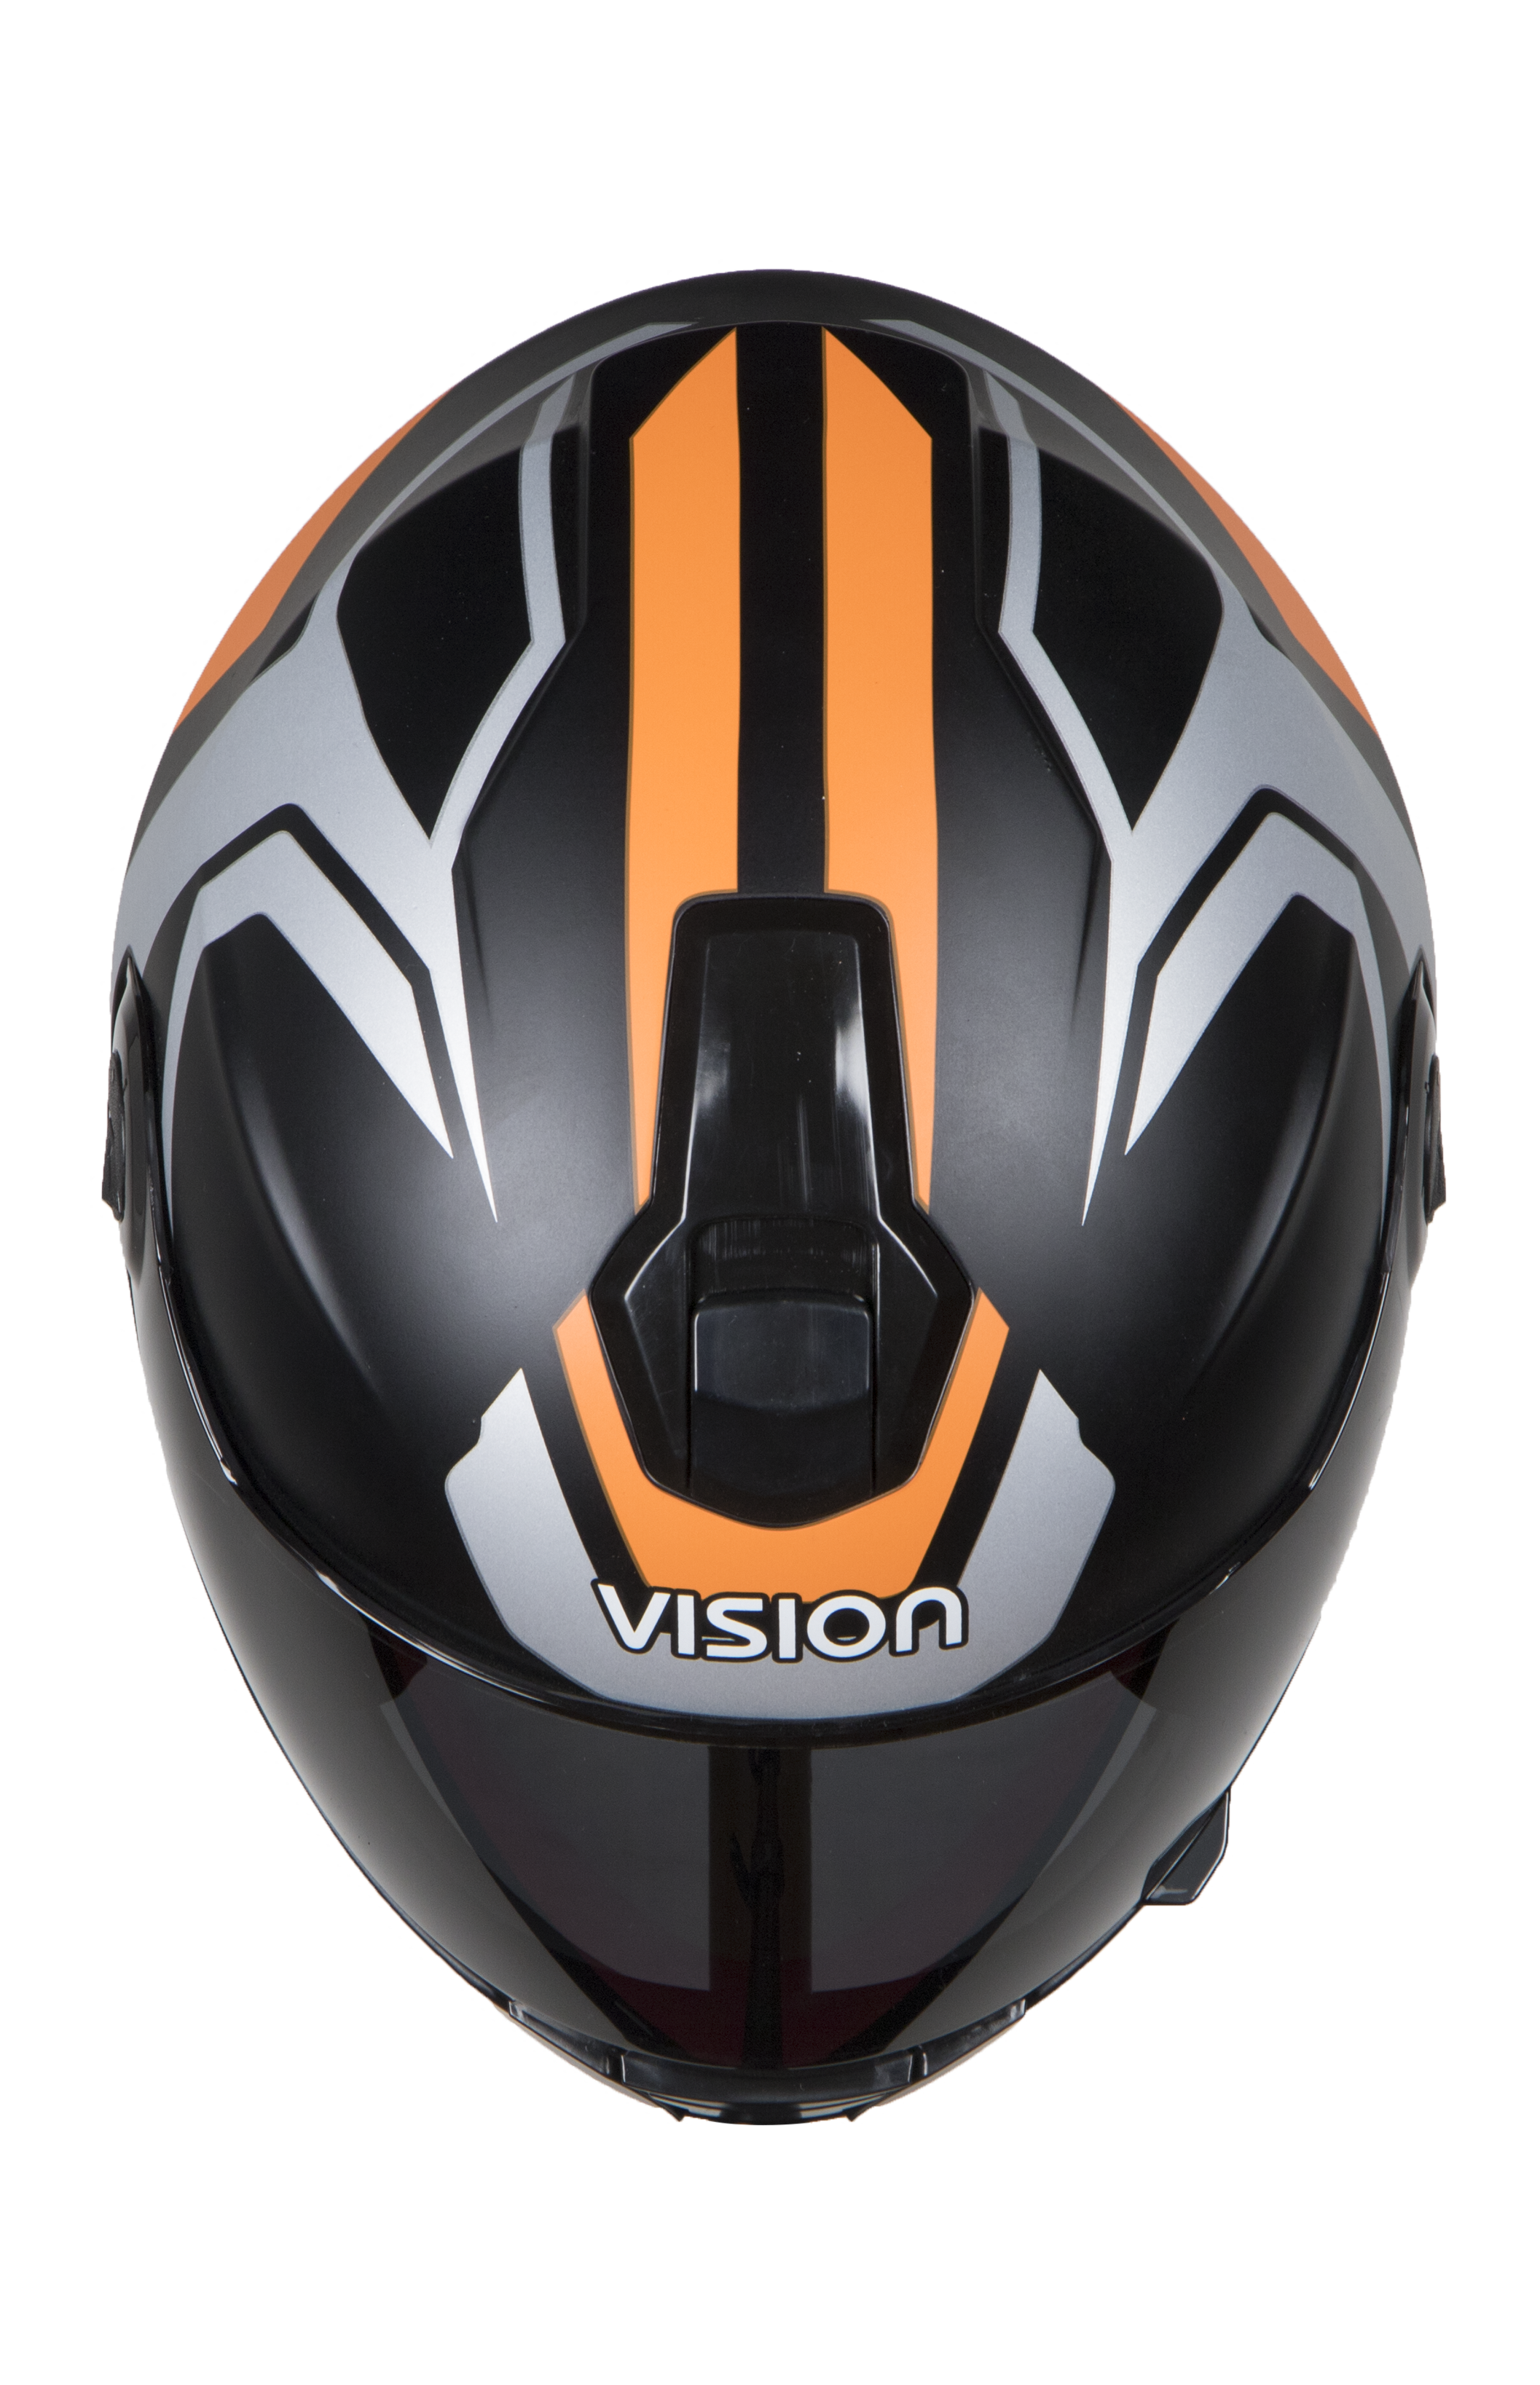 SBH-11 Alpha Beta Mat Silver Orange( Fitted With Clear Visor Extra Smoke Visor Free)